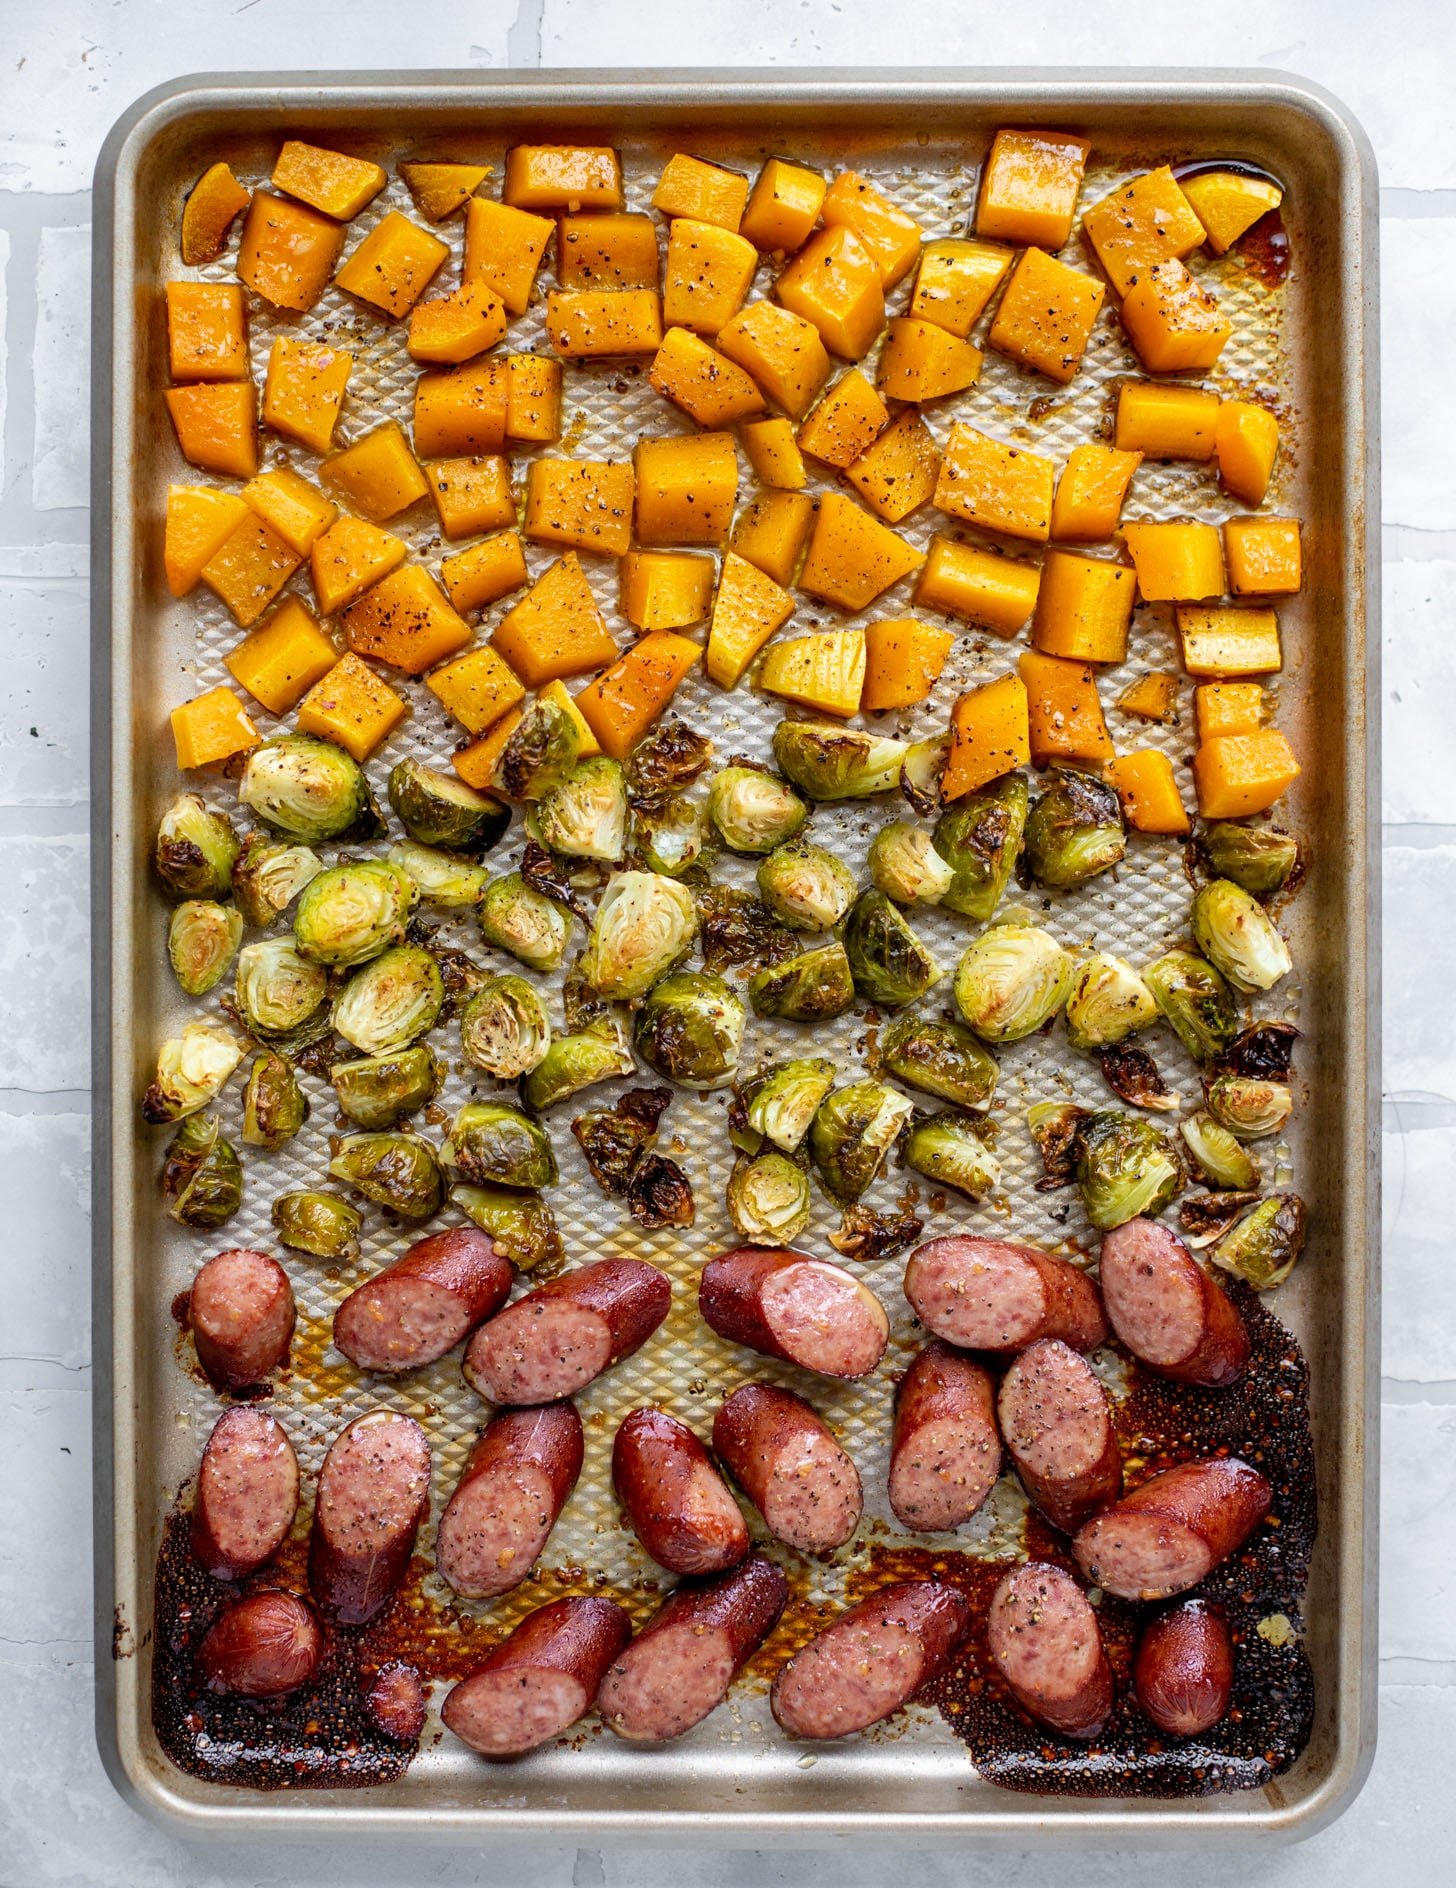 maple sheet pan smoked turkey sausage with butternut squash and brussels sprouts just out of the oven